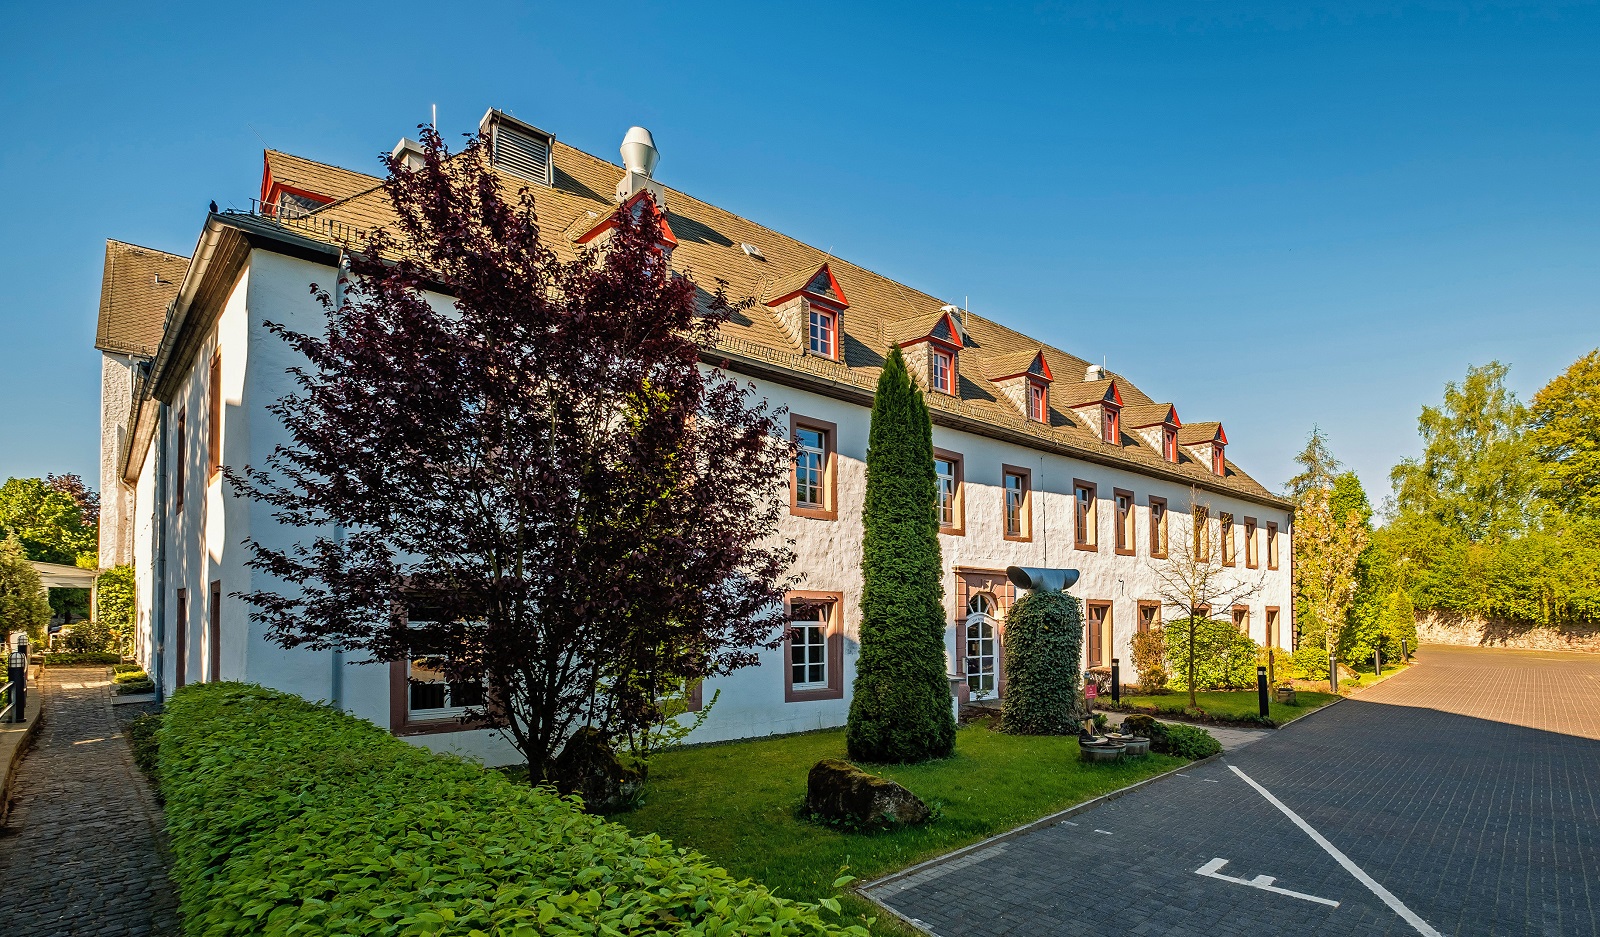 Hotel Augustiner Kloster <br/>13900.00 ew <br/> <a href='http://vakantieoplossing.nl/outpage/?id=910a52bb776a58859657806b4ea9eda5' target='_blank'>View Details</a>